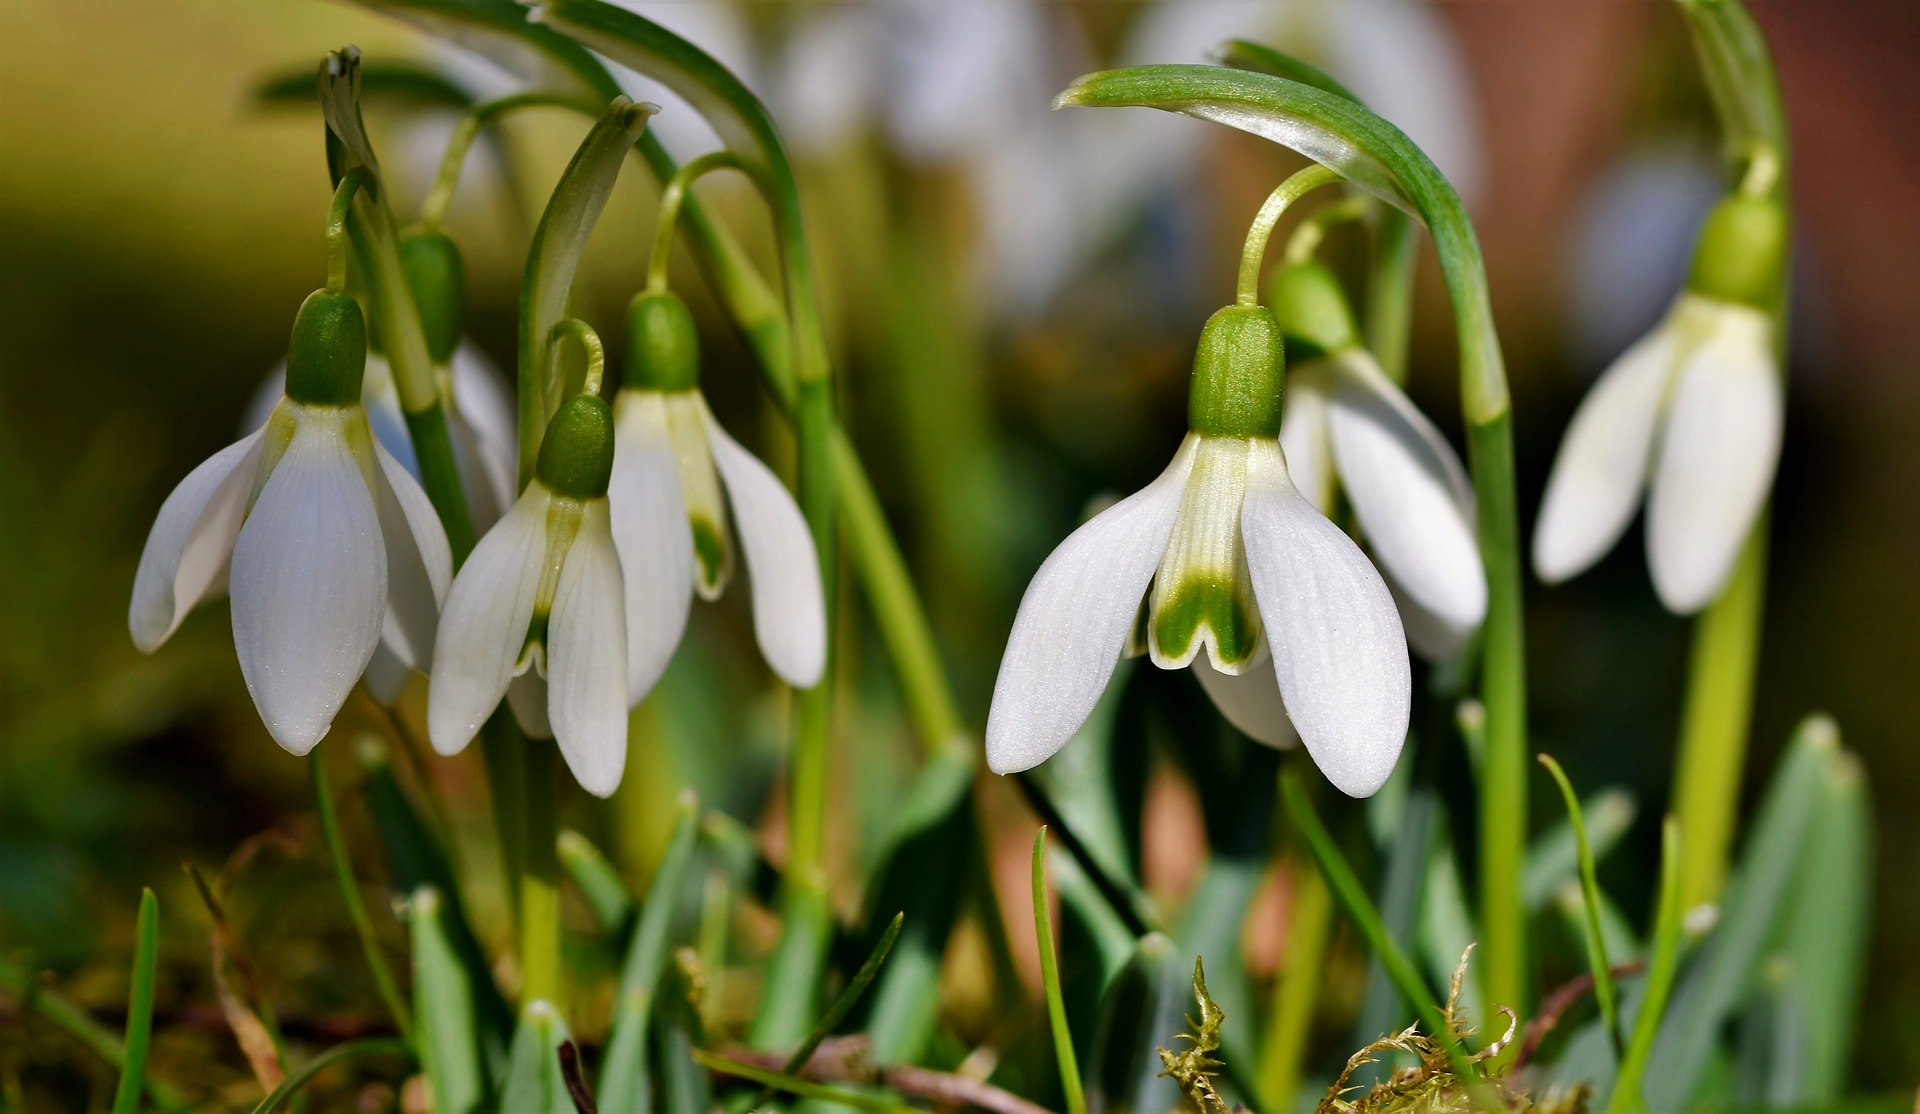 A group of snowdrops growing